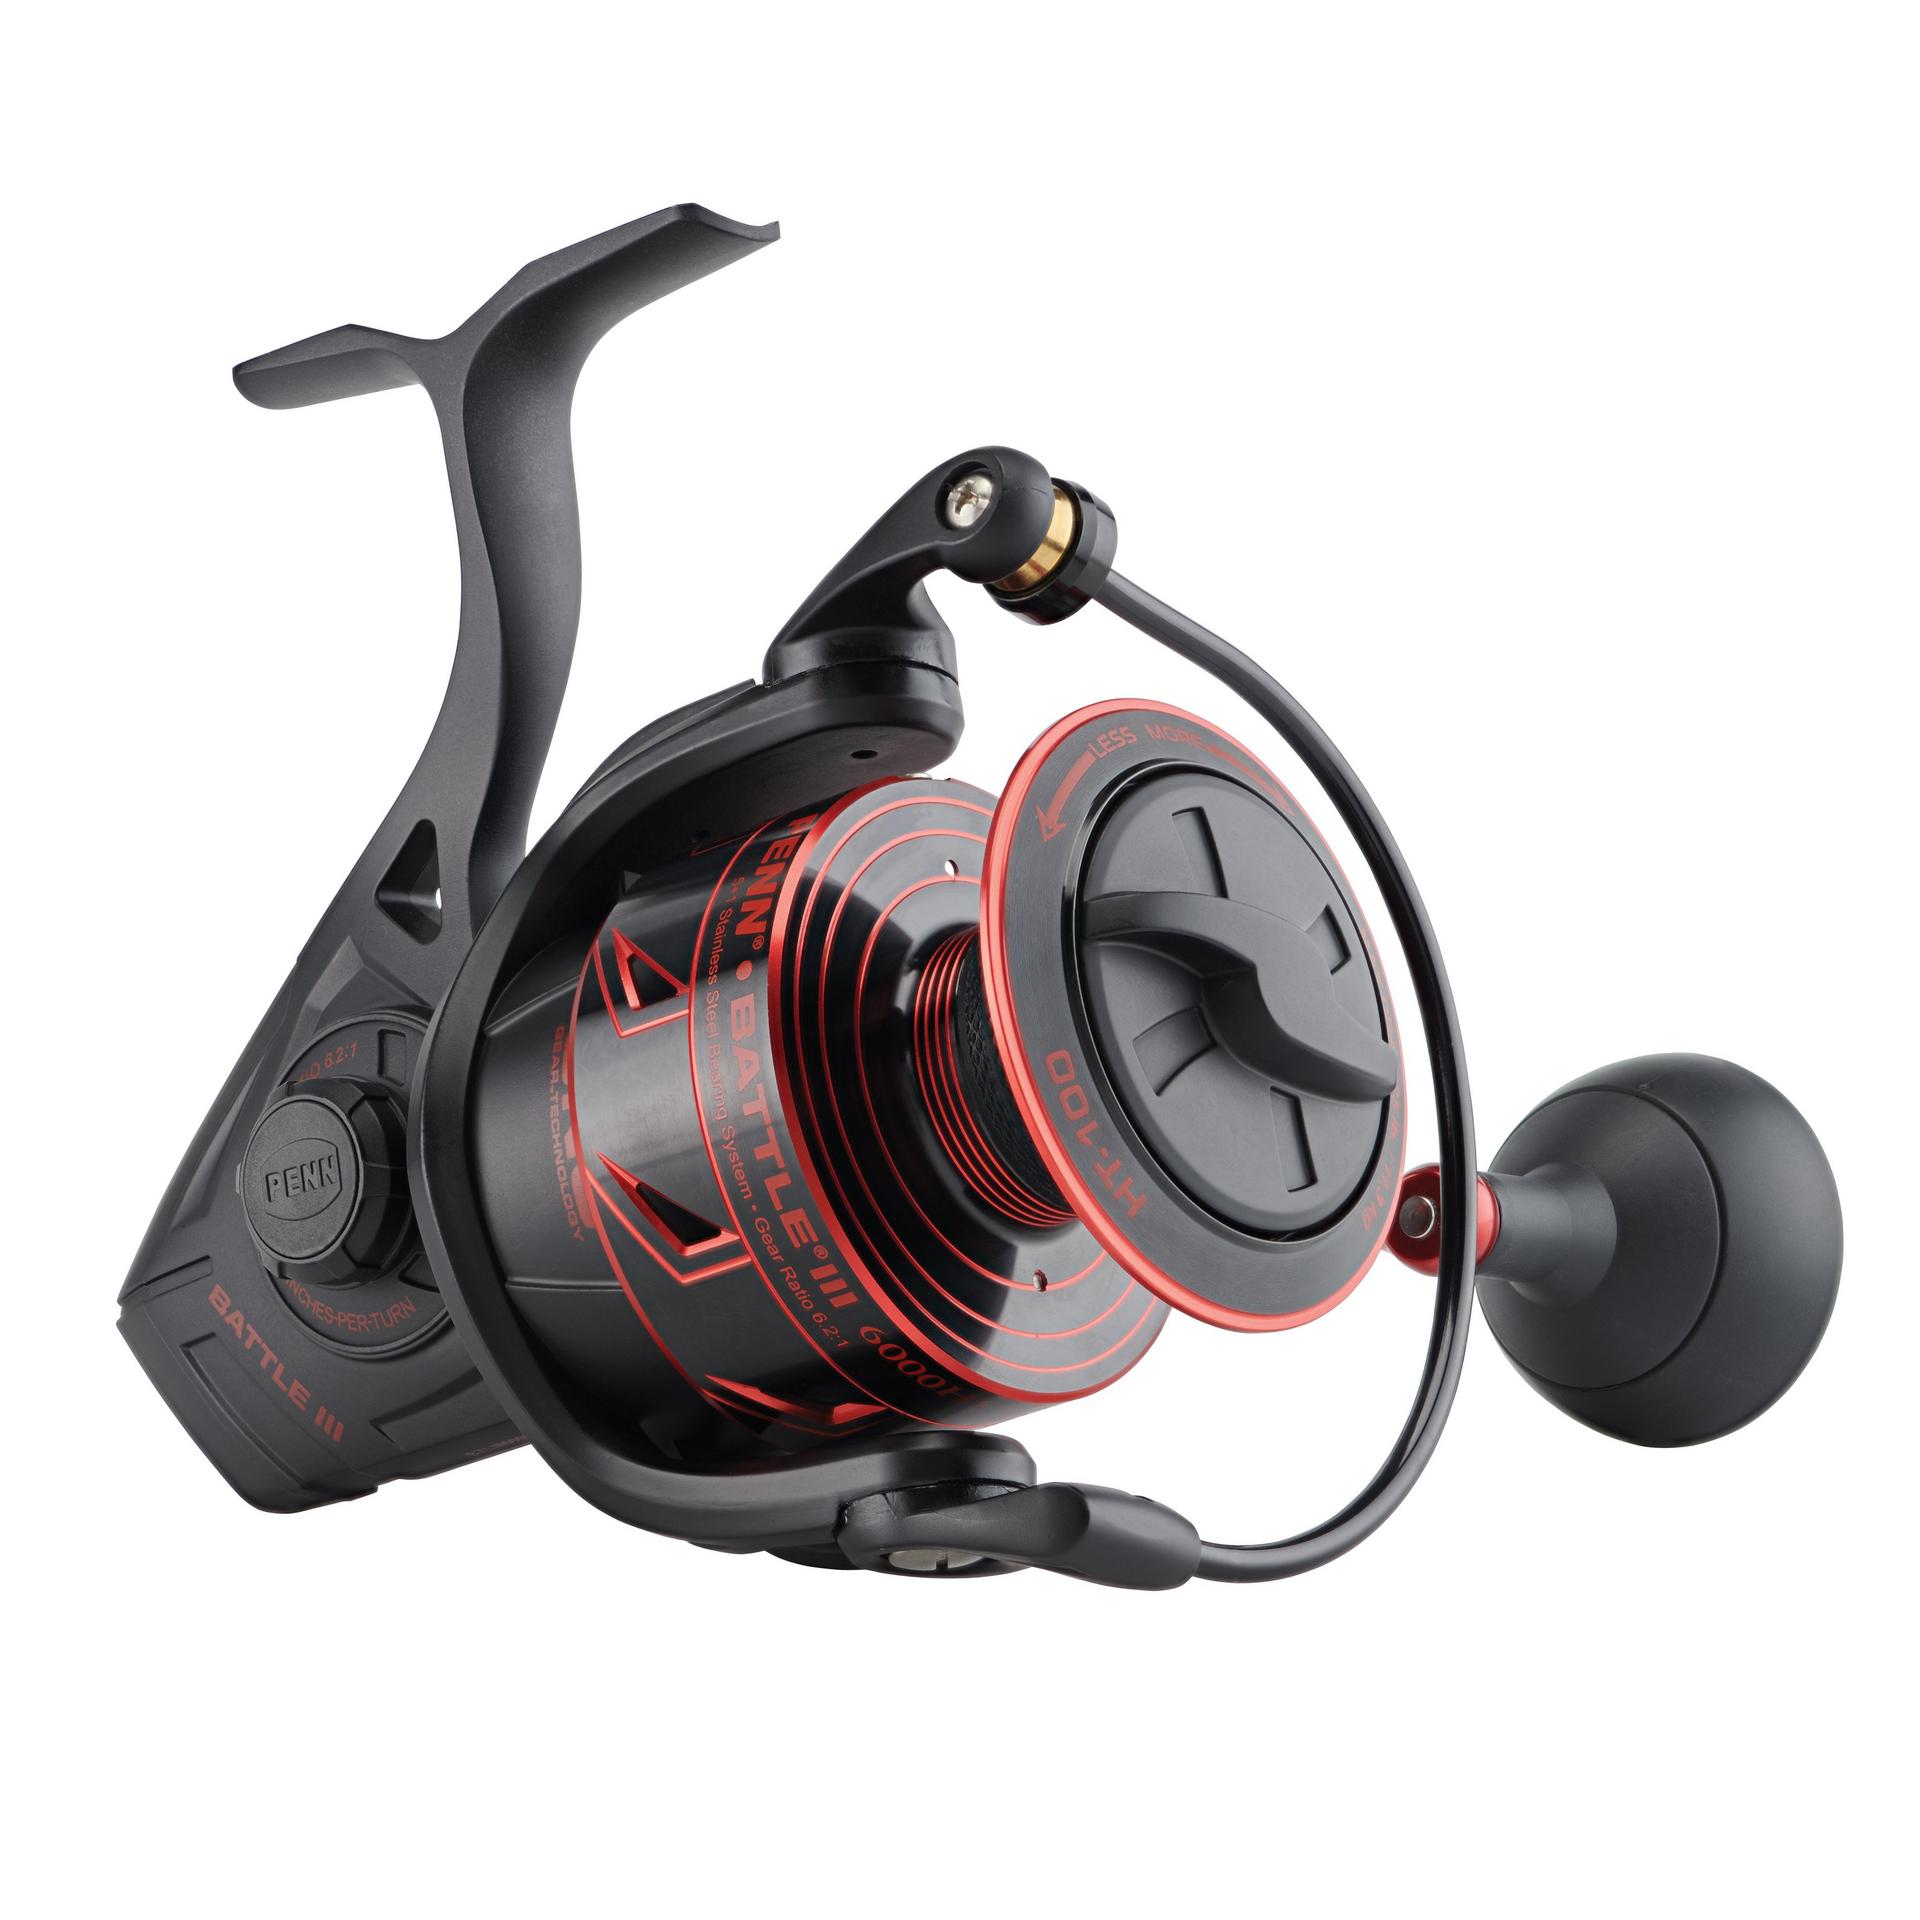 Penn Battalion Surf and Inshore Rod Components for $100 - Fishing Tackle  Retailer - The Business Magazine of the Sportfishing Industry